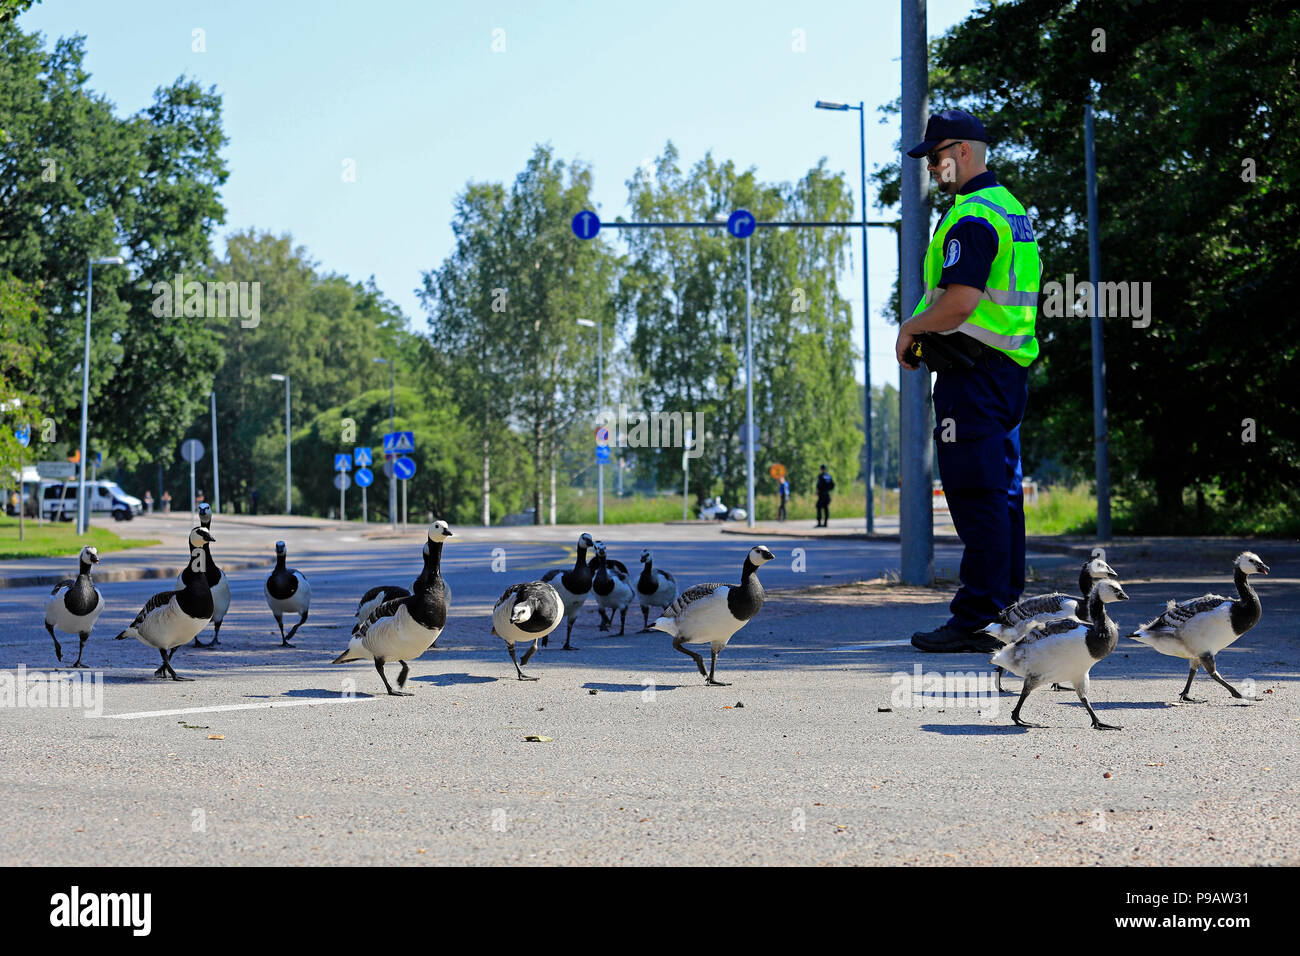 Helsinki, Finland. July 16, 2018. Flock of Barnacle geese cross the street at Ramsaynranta near the time the motorcade of US President Donald Trump and First Lady Melania Trump is expected to pass. Credit: Taina Sohlman/Alamy Live News Stock Photo